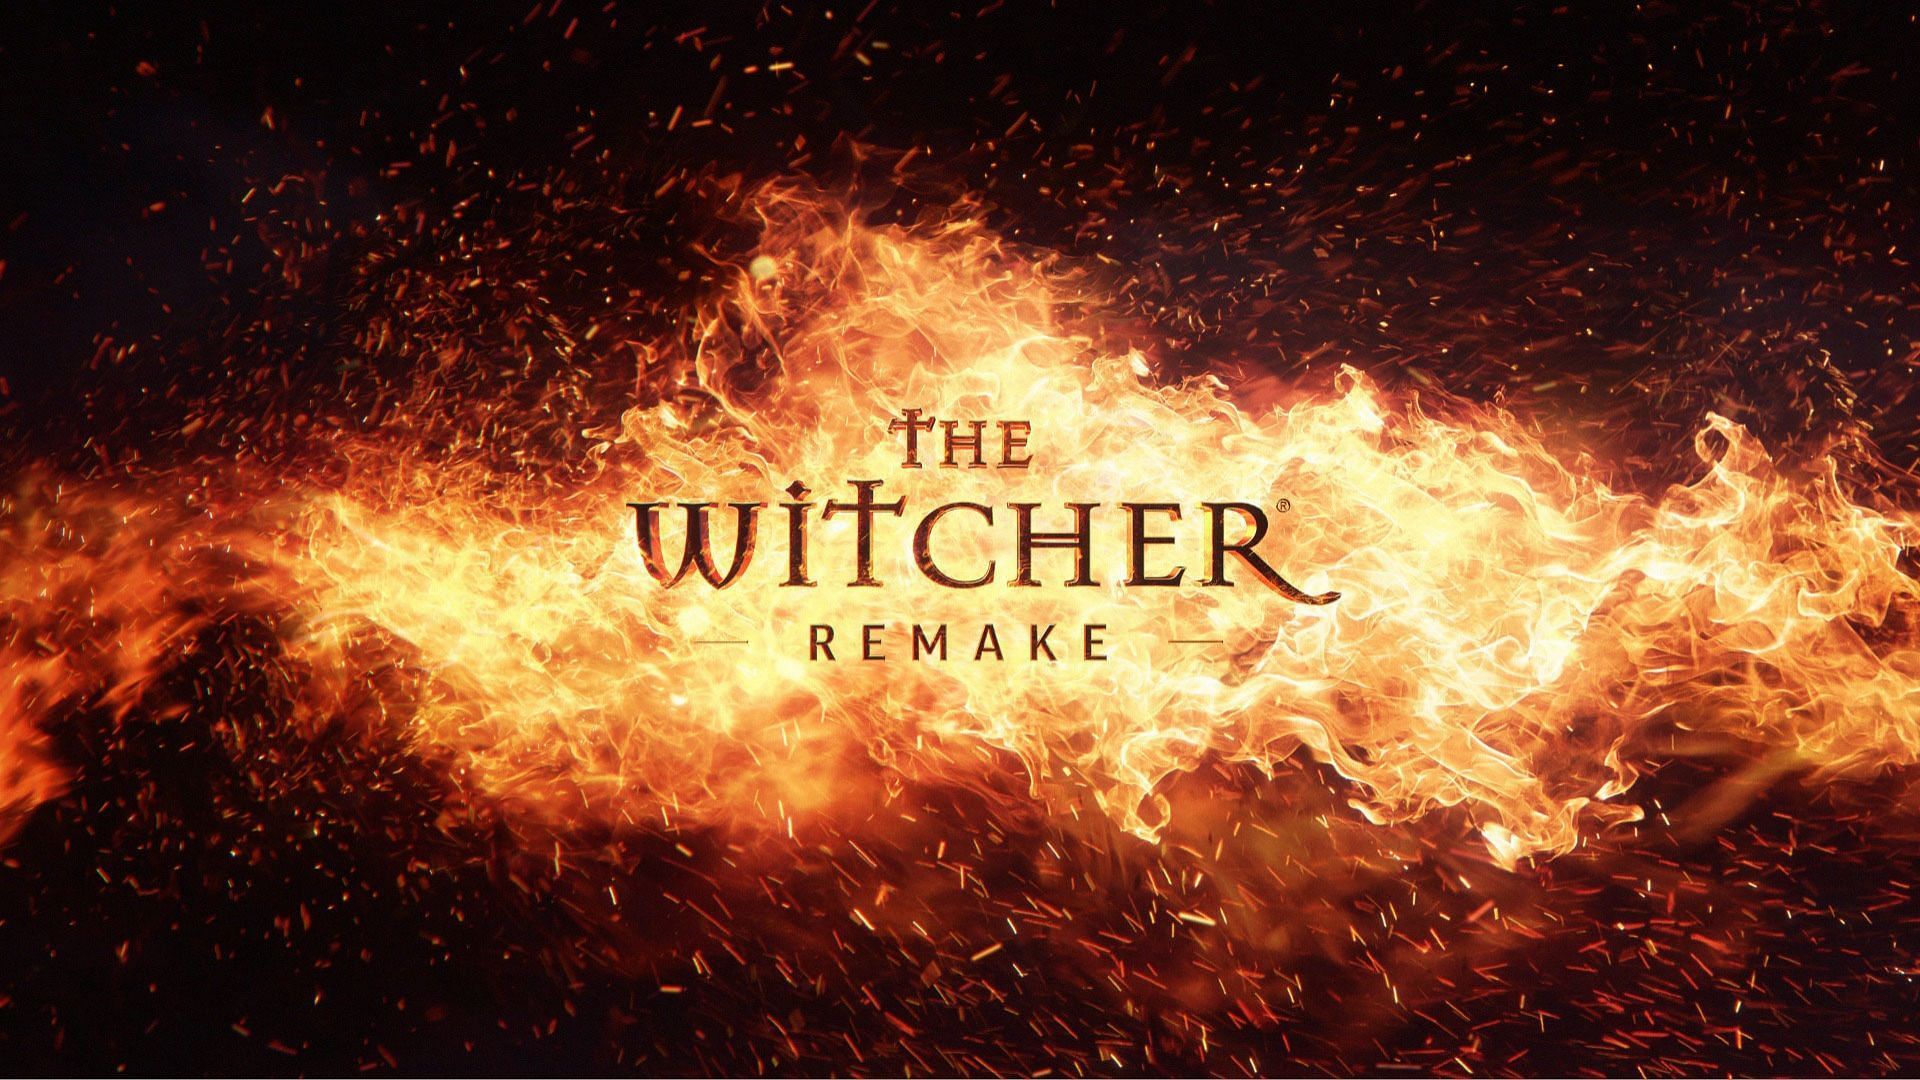 CD PROJEKT RED is working on a remake of the original The Witcher game (Image via CD PROJEKT RED)